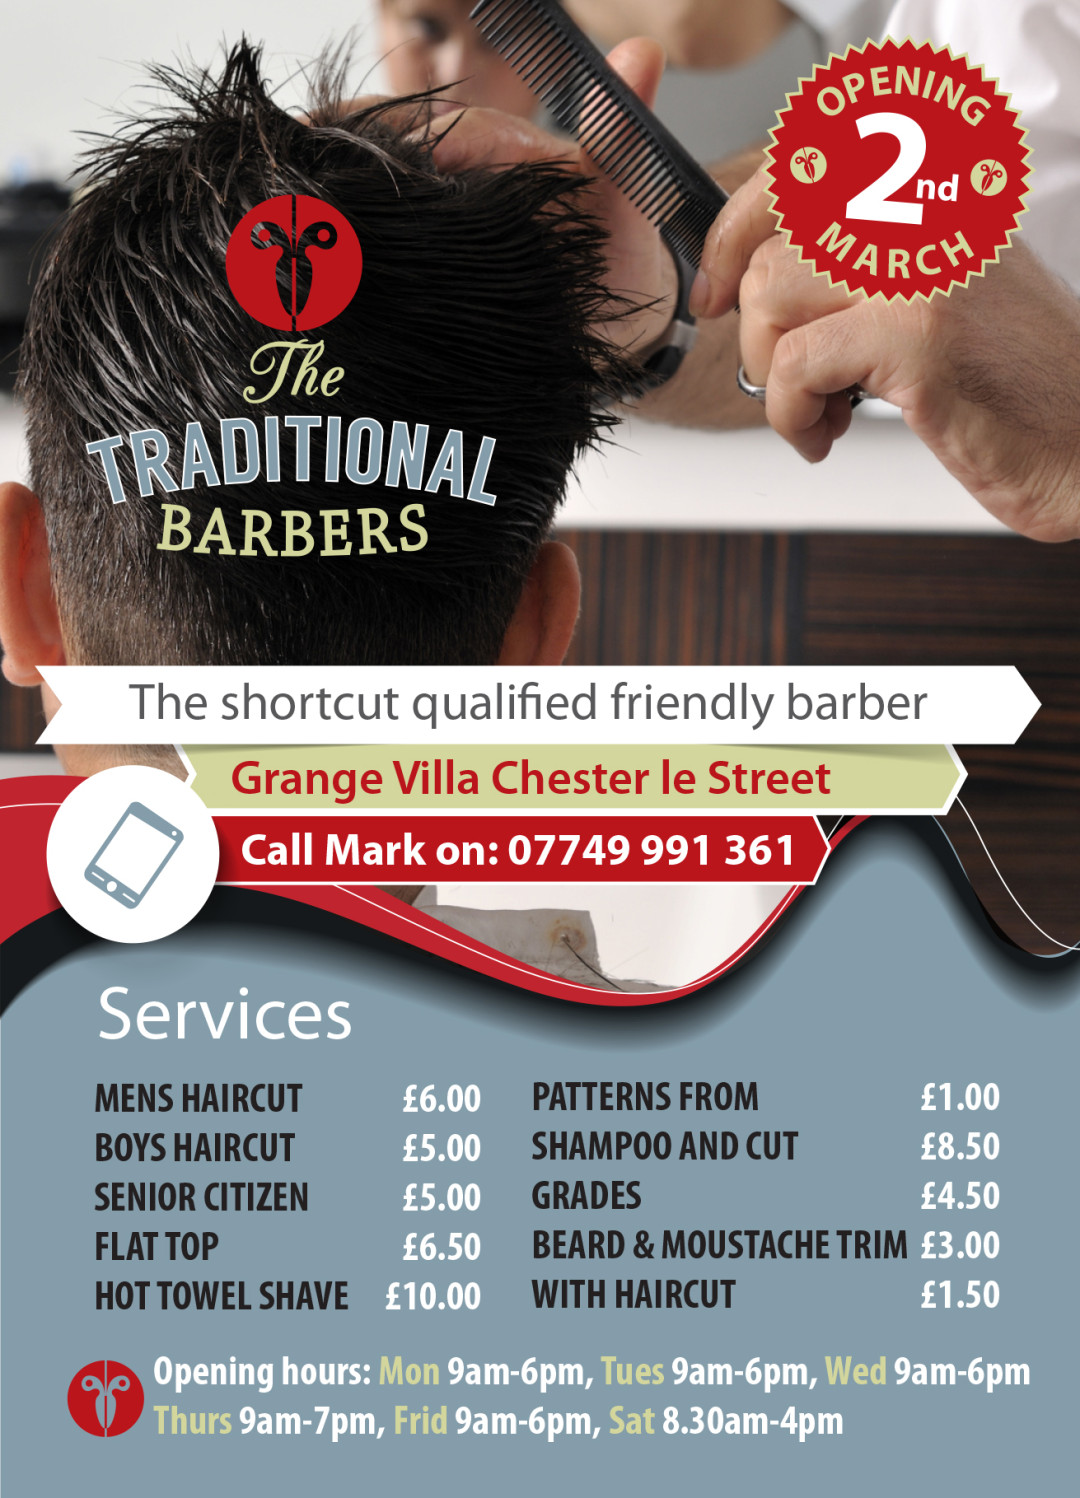 Barbers A5 Leaflet design – startup company